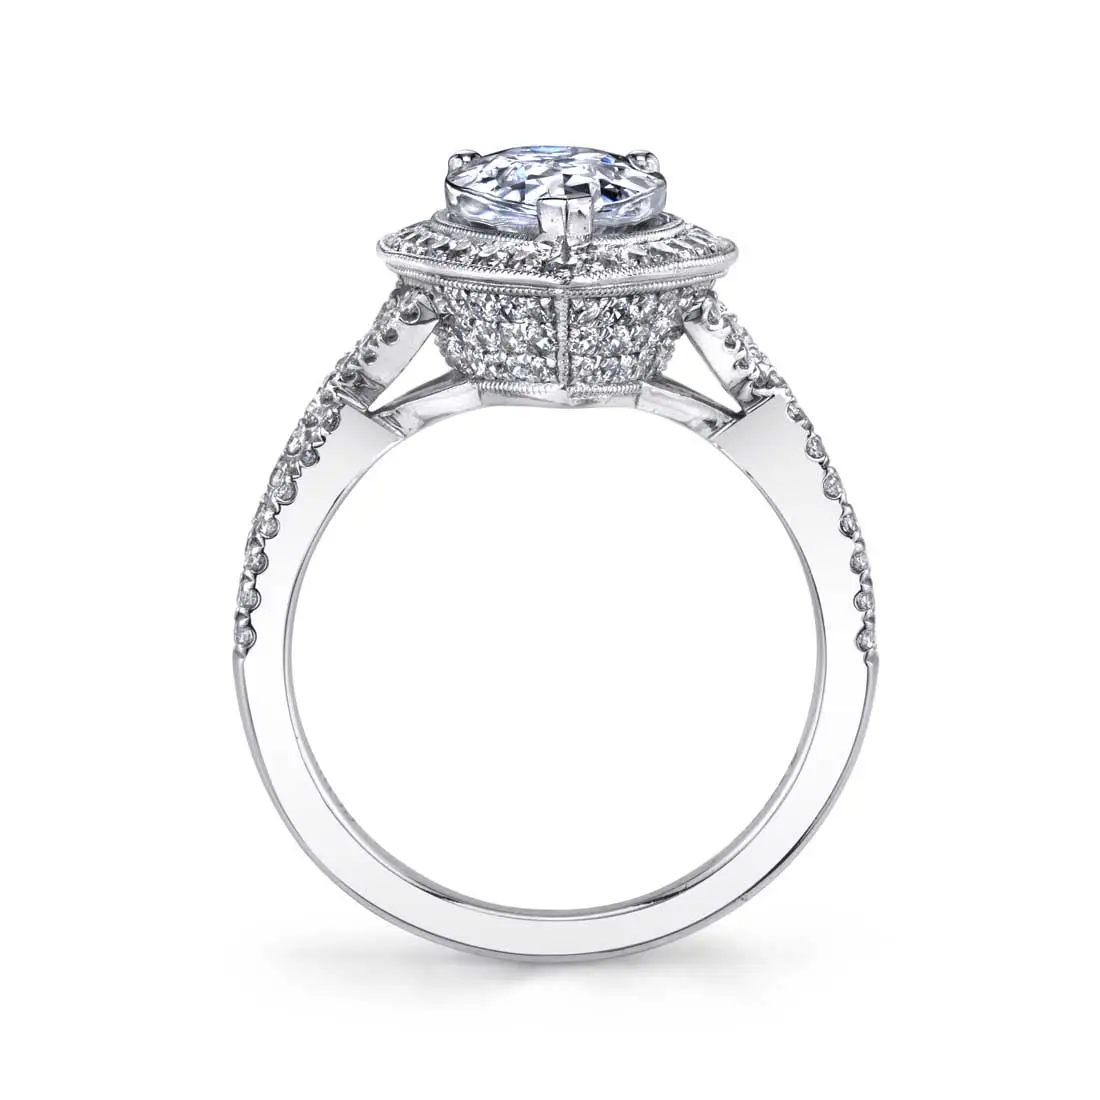 Pear Shaped Engagement Ring with Halo - Alyssa